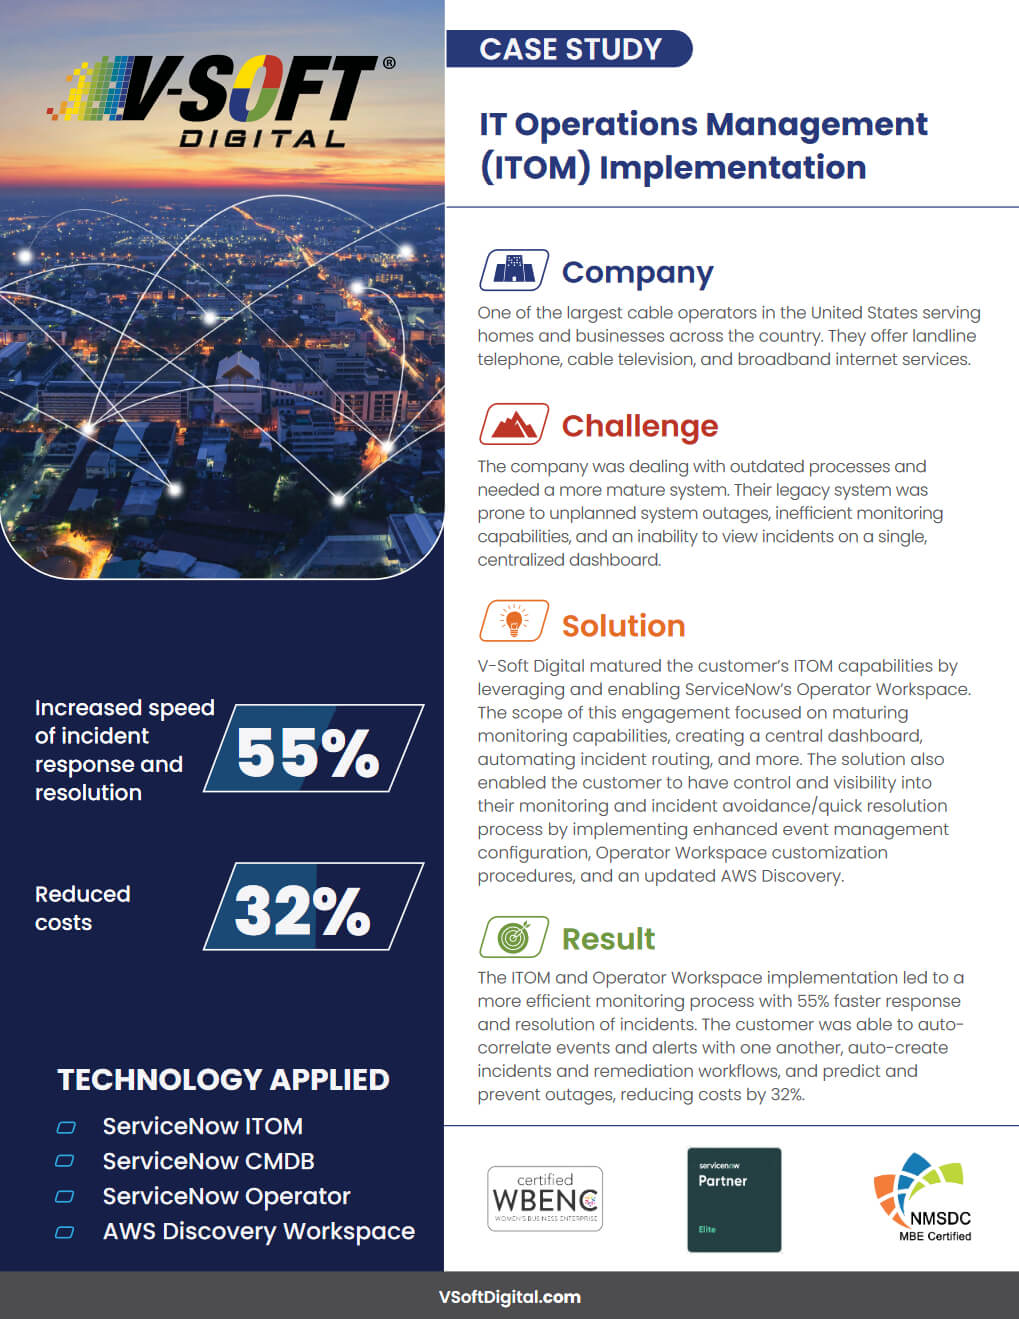 IT Operations Management (ITOM) Implementation